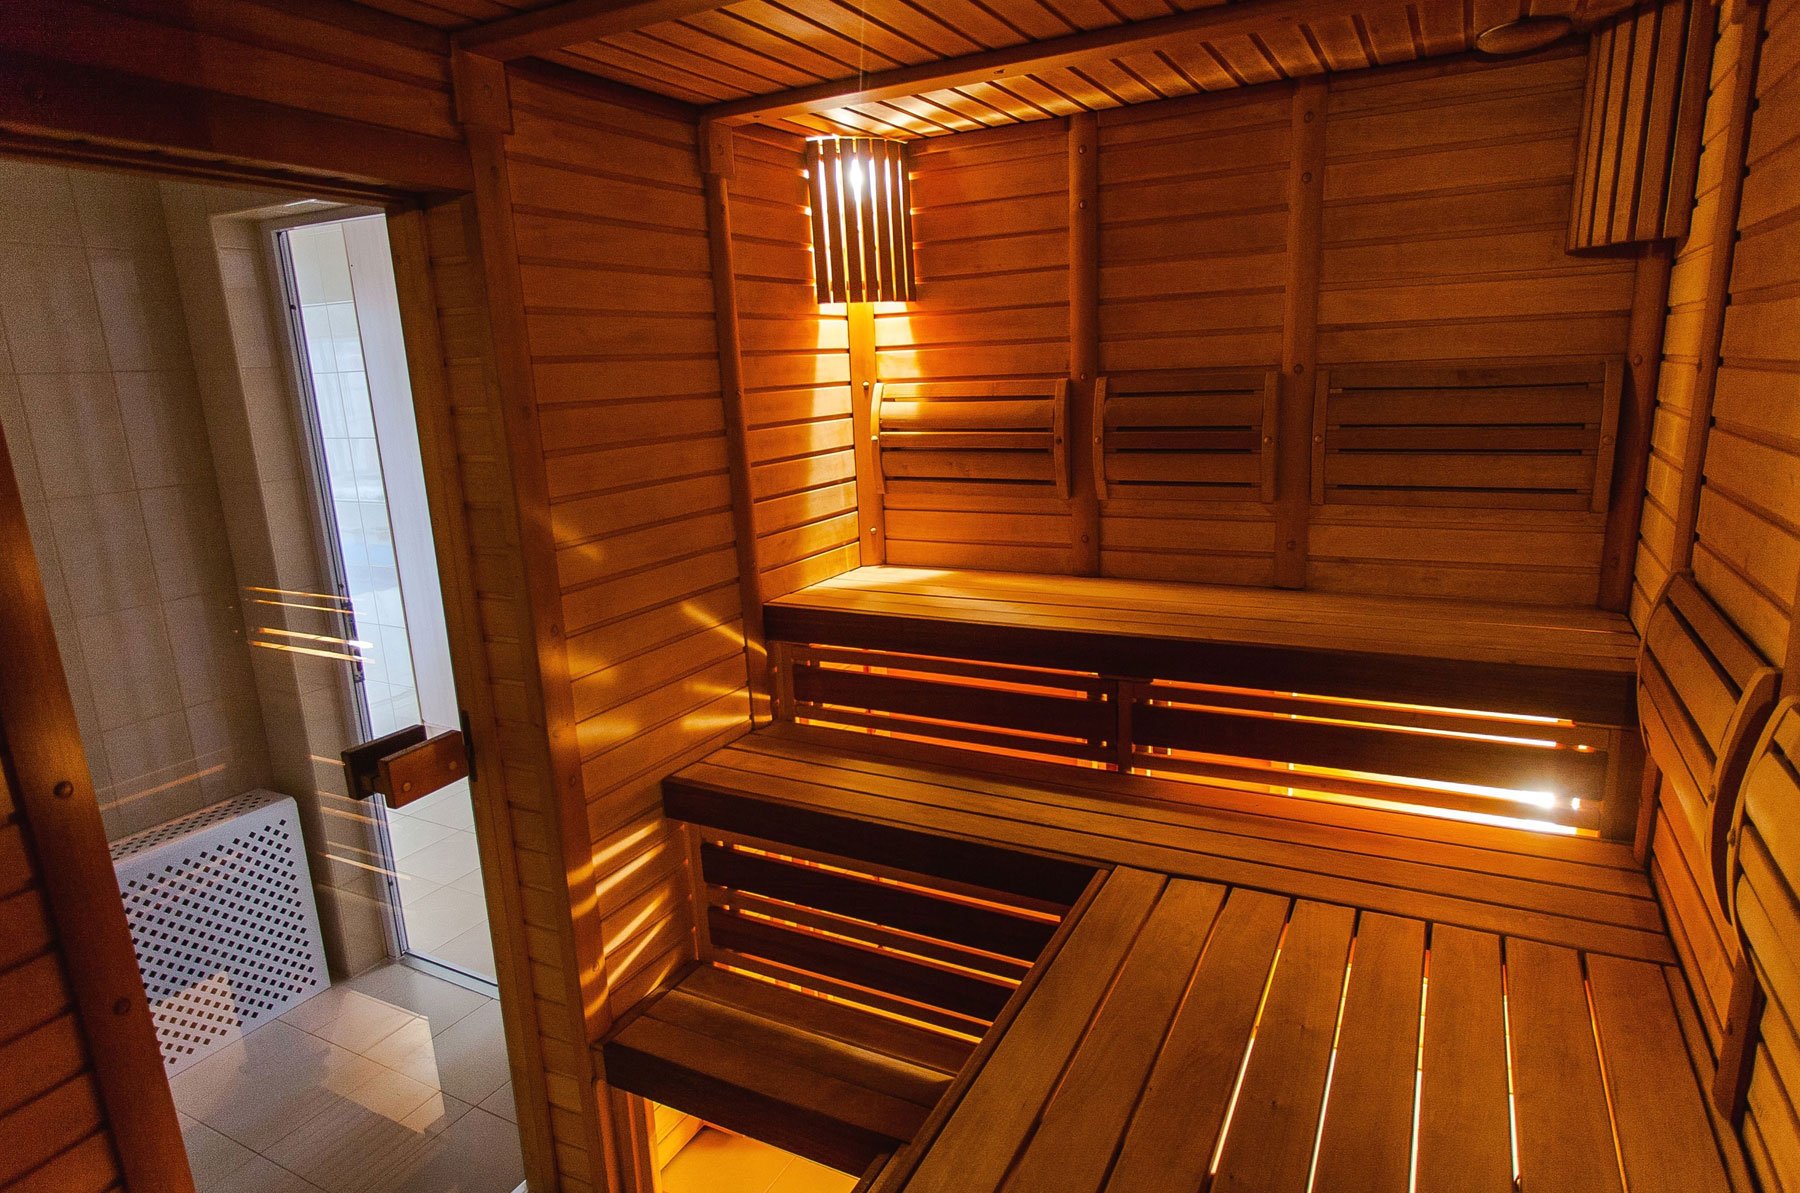 Choosing the Best Wood for Sauna Design (and Some You Shouldn’t Use)